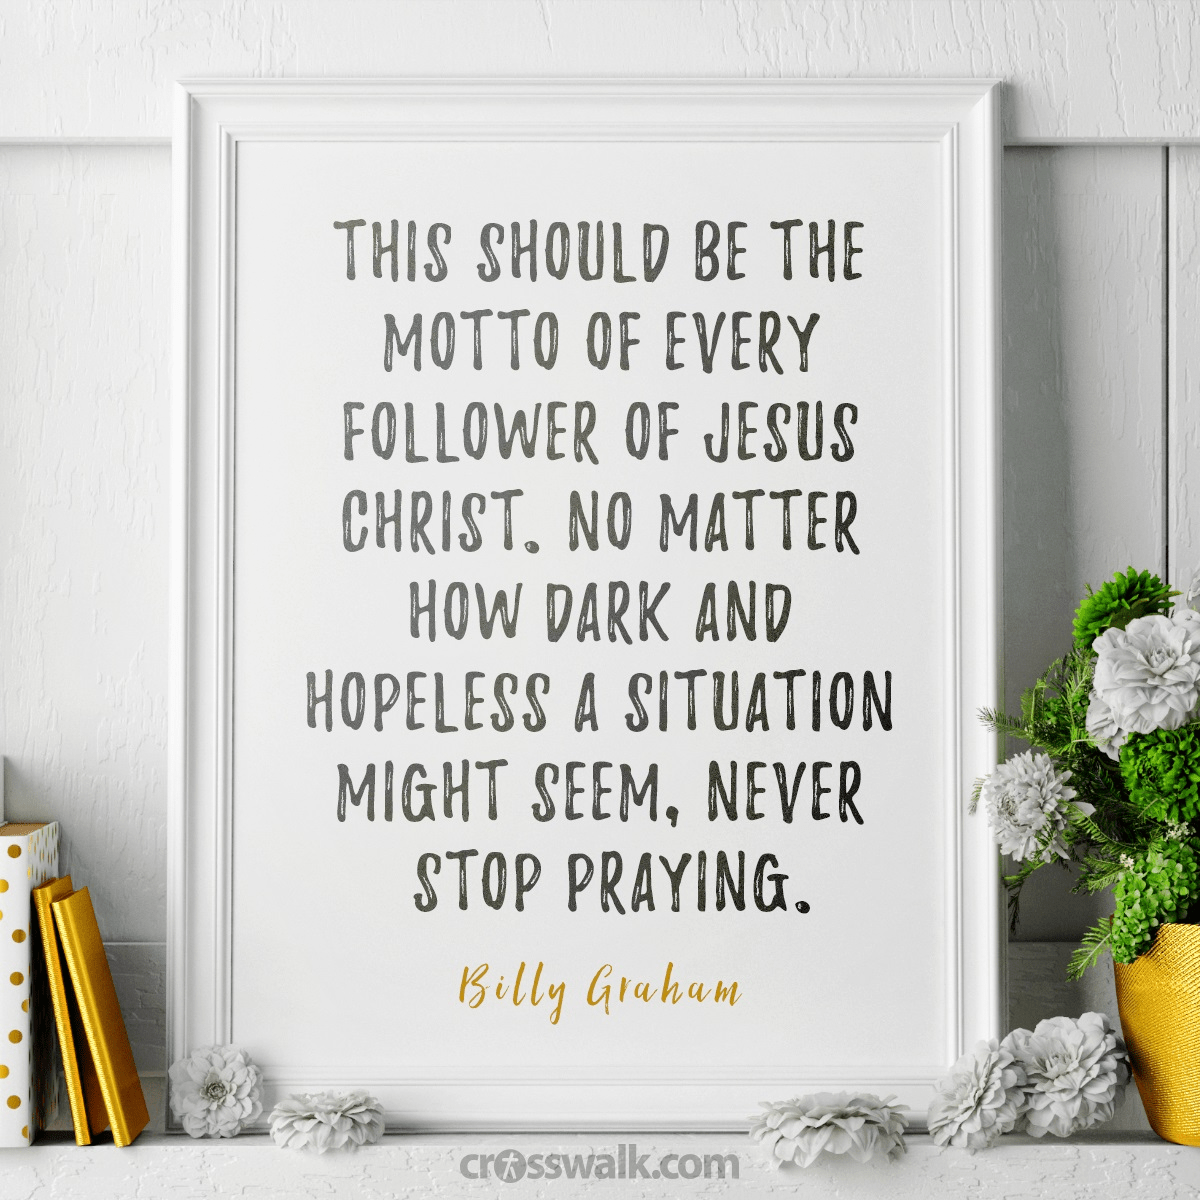 "This should be the motto of every follower of Jesus Christ. No matter how dark and hopeless a situation might seem, never stop praying."